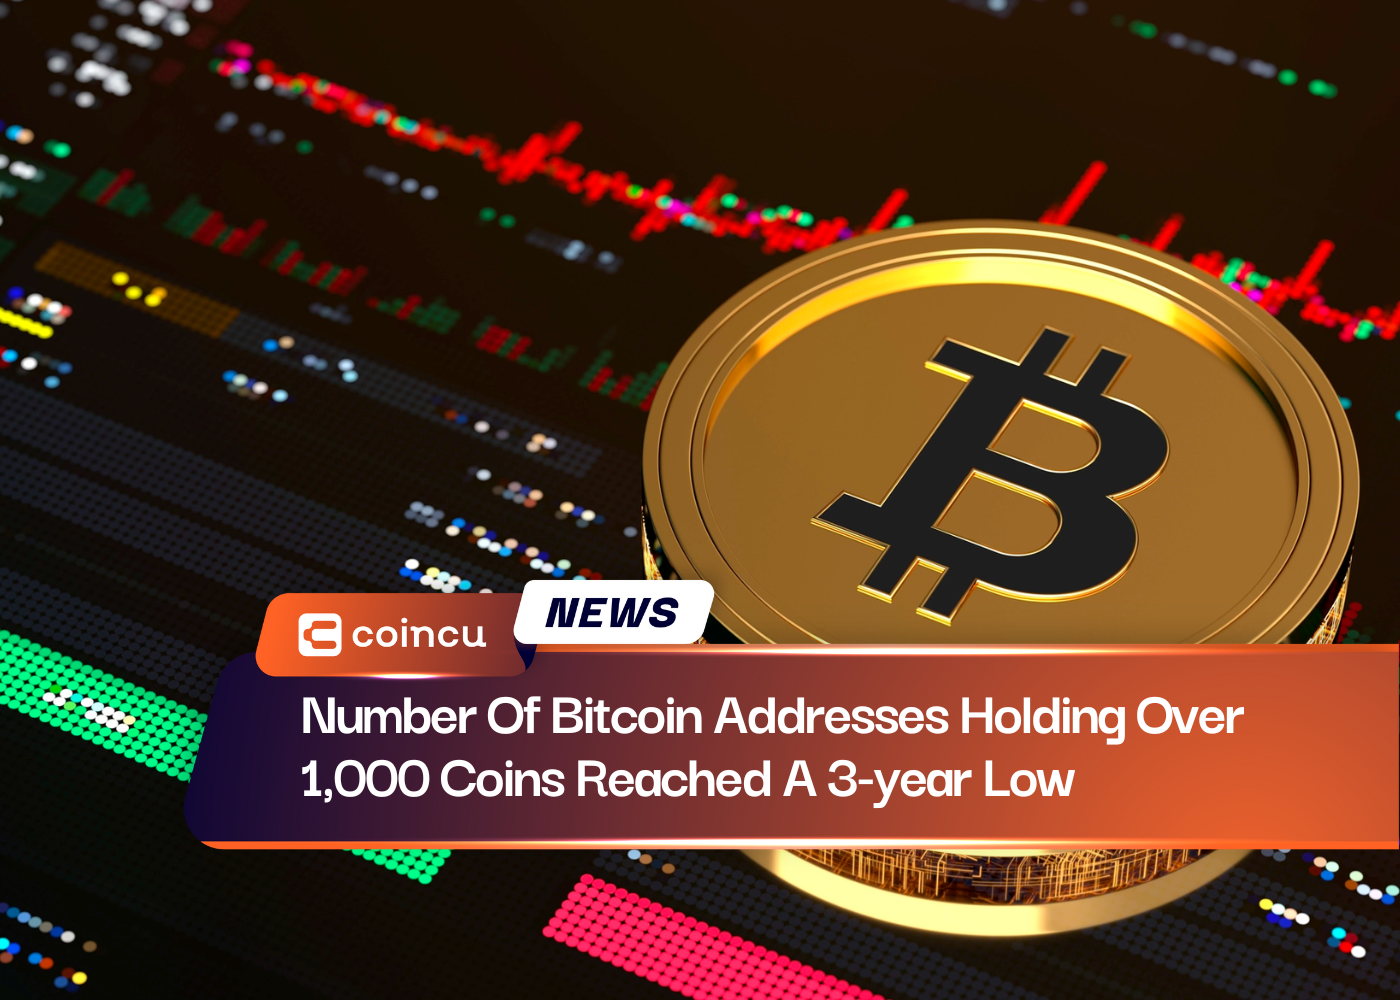 Number Of Bitcoin Addresses Holding Over 1,000 Coins Reached A 3-year Low